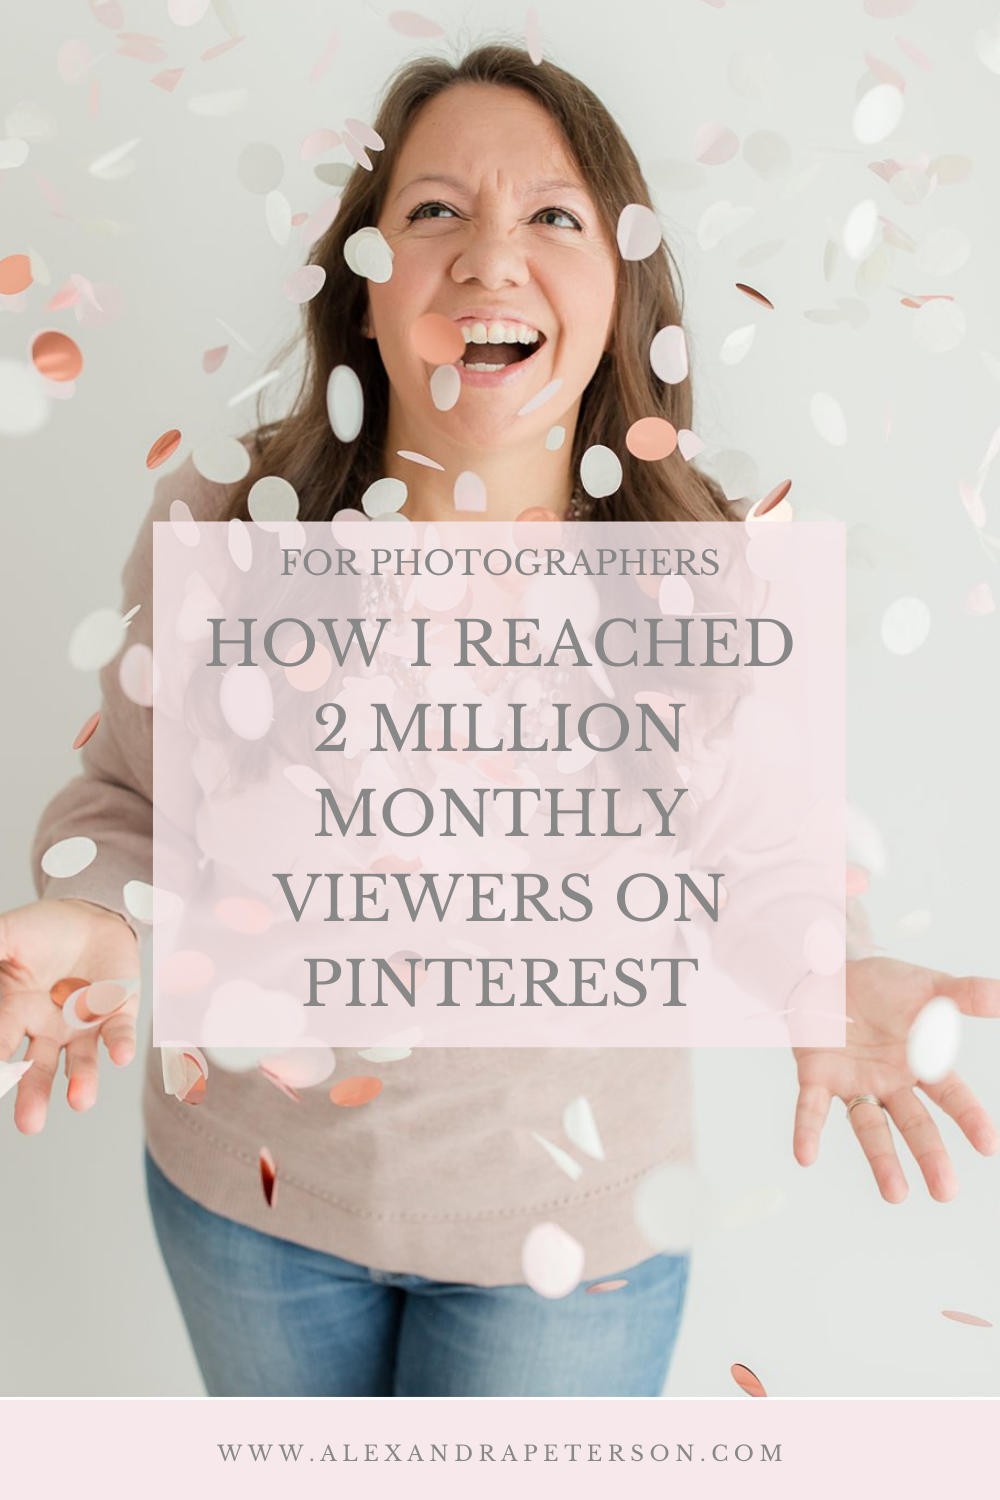 How I Reached 2 Million Monthly Viewers on Pinterest